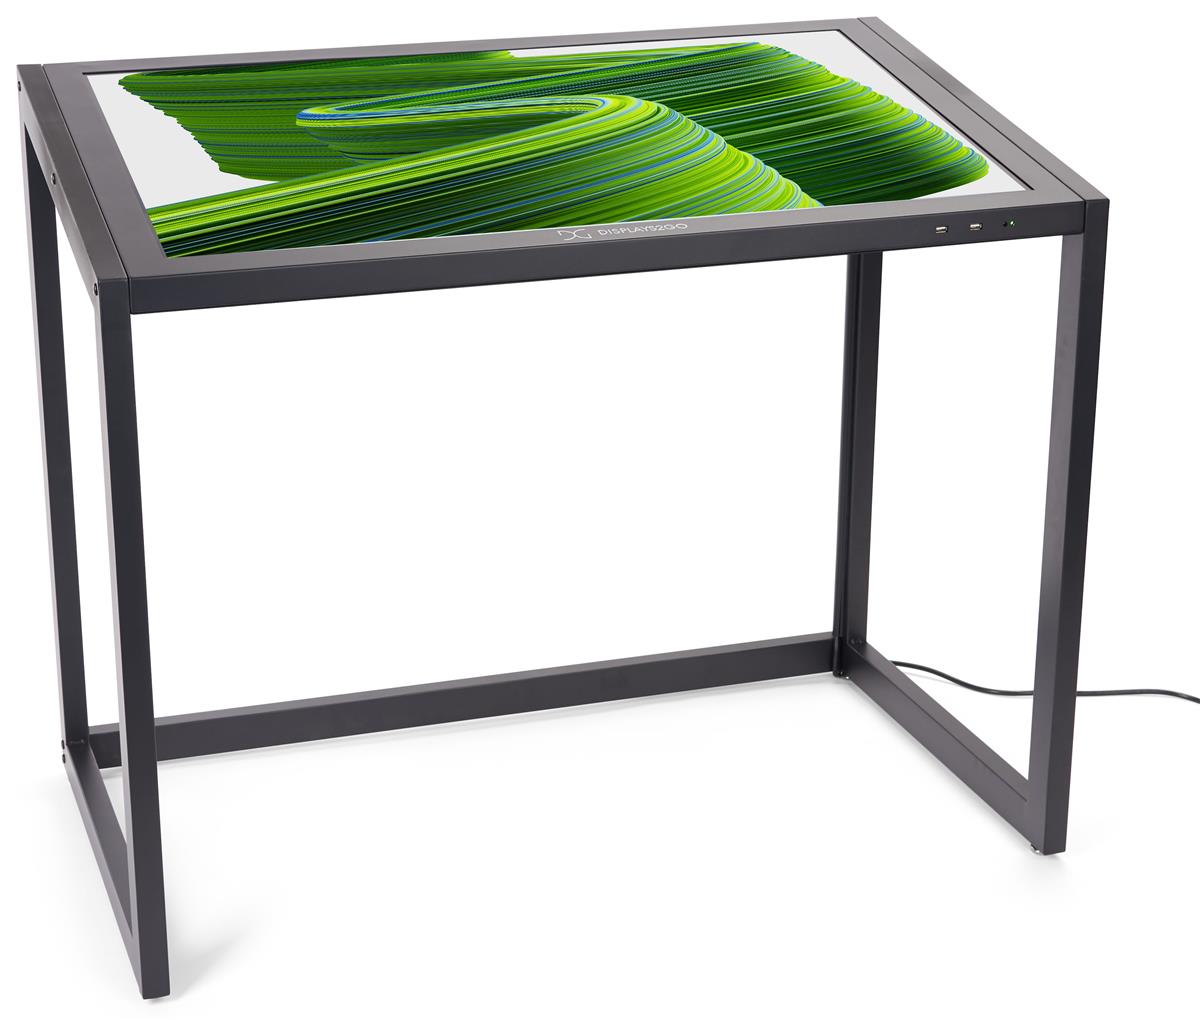 Accessible touch screen table with pre-installed DiViEX slide show app